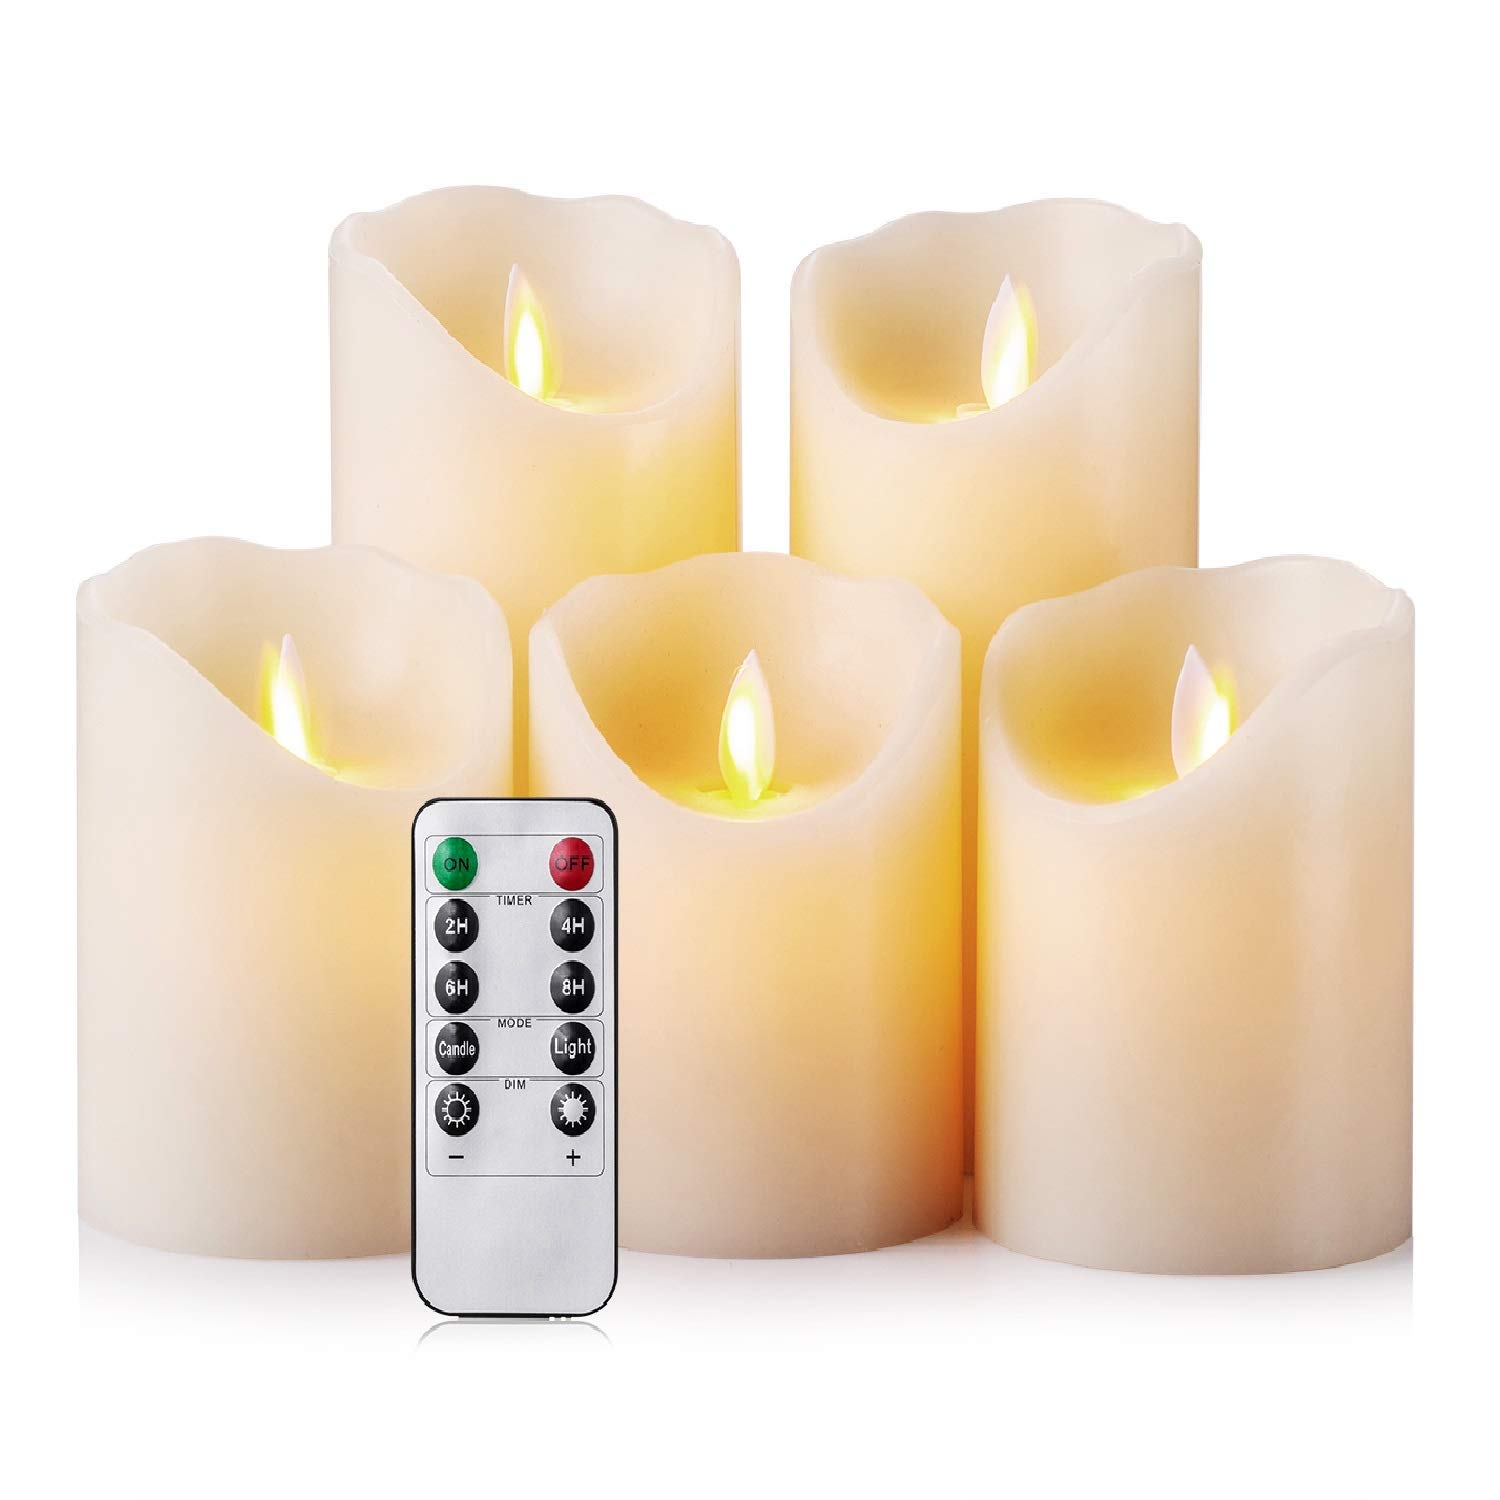 4 5 6 Set Remote/Timer kingleder Battery Operated Pillar Candles,Color Changing Realistic Flickering LED Candle for Hanukkah Decorations,Christmas Decorations,Wall Sconces,Fireplace Decoration 